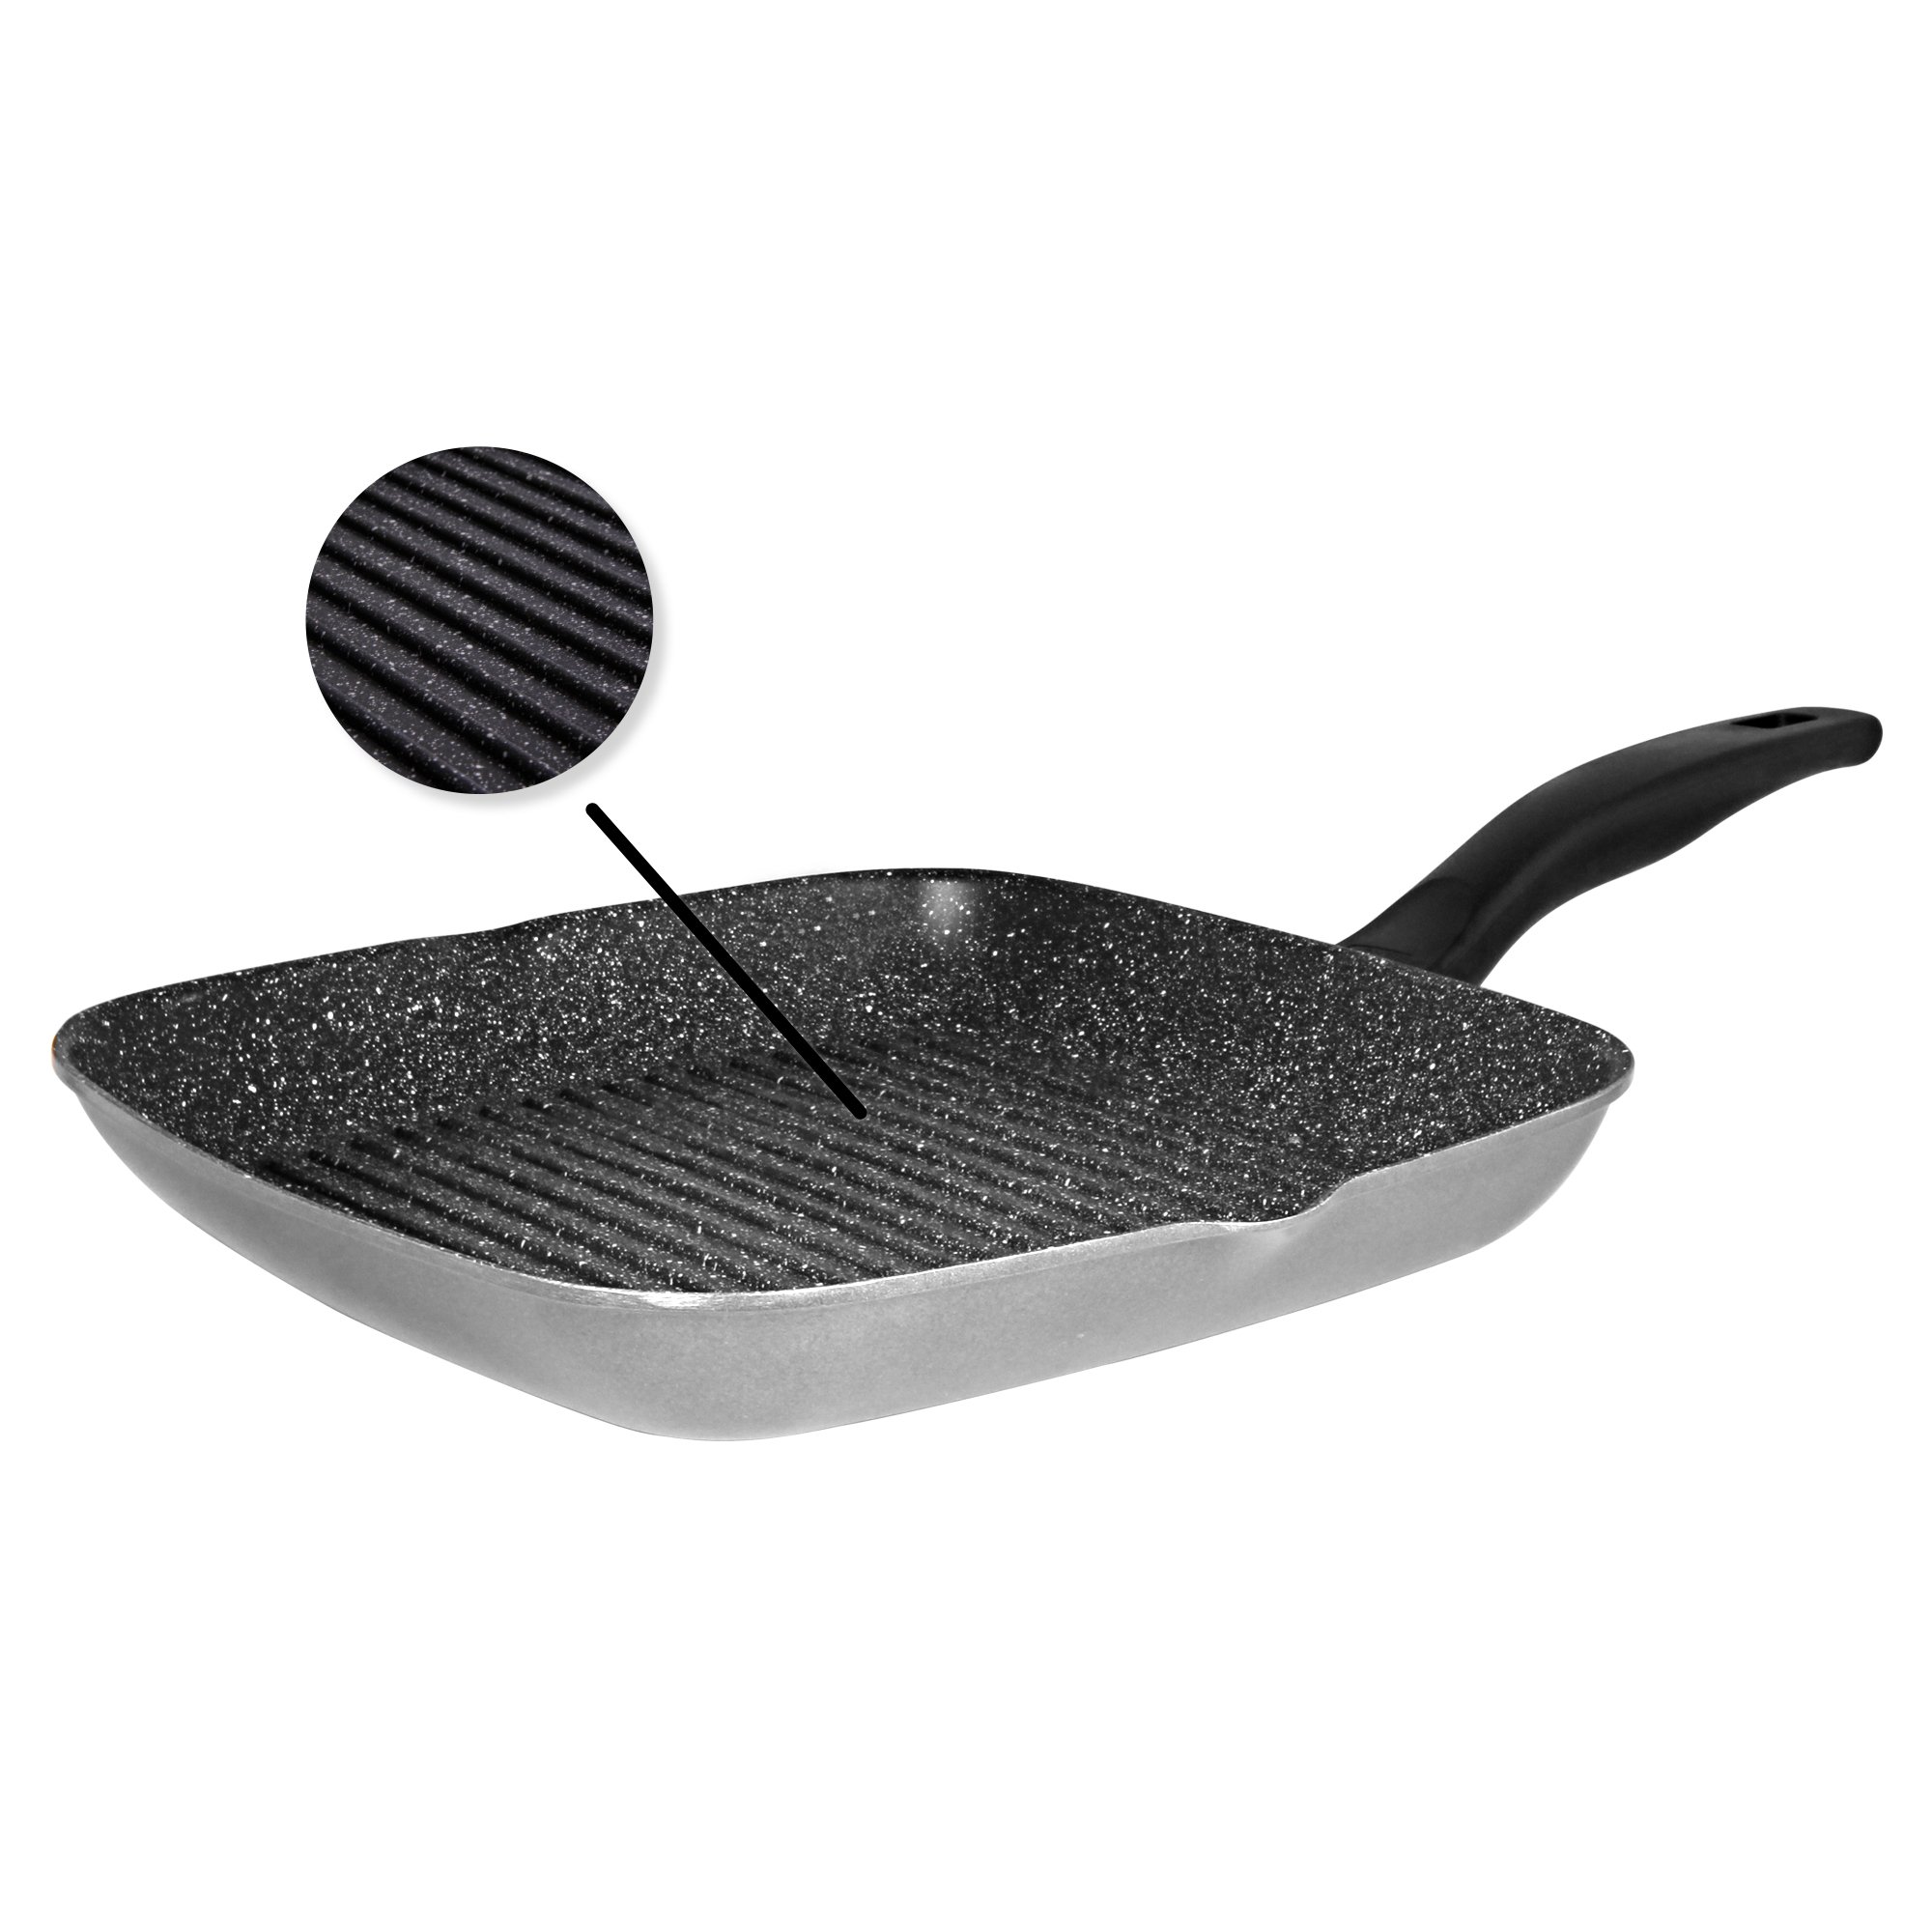 STONELINE® Grill pan 28 x 28 cm, with 2 spouts, pan non-stick coated, induction and oven-safe